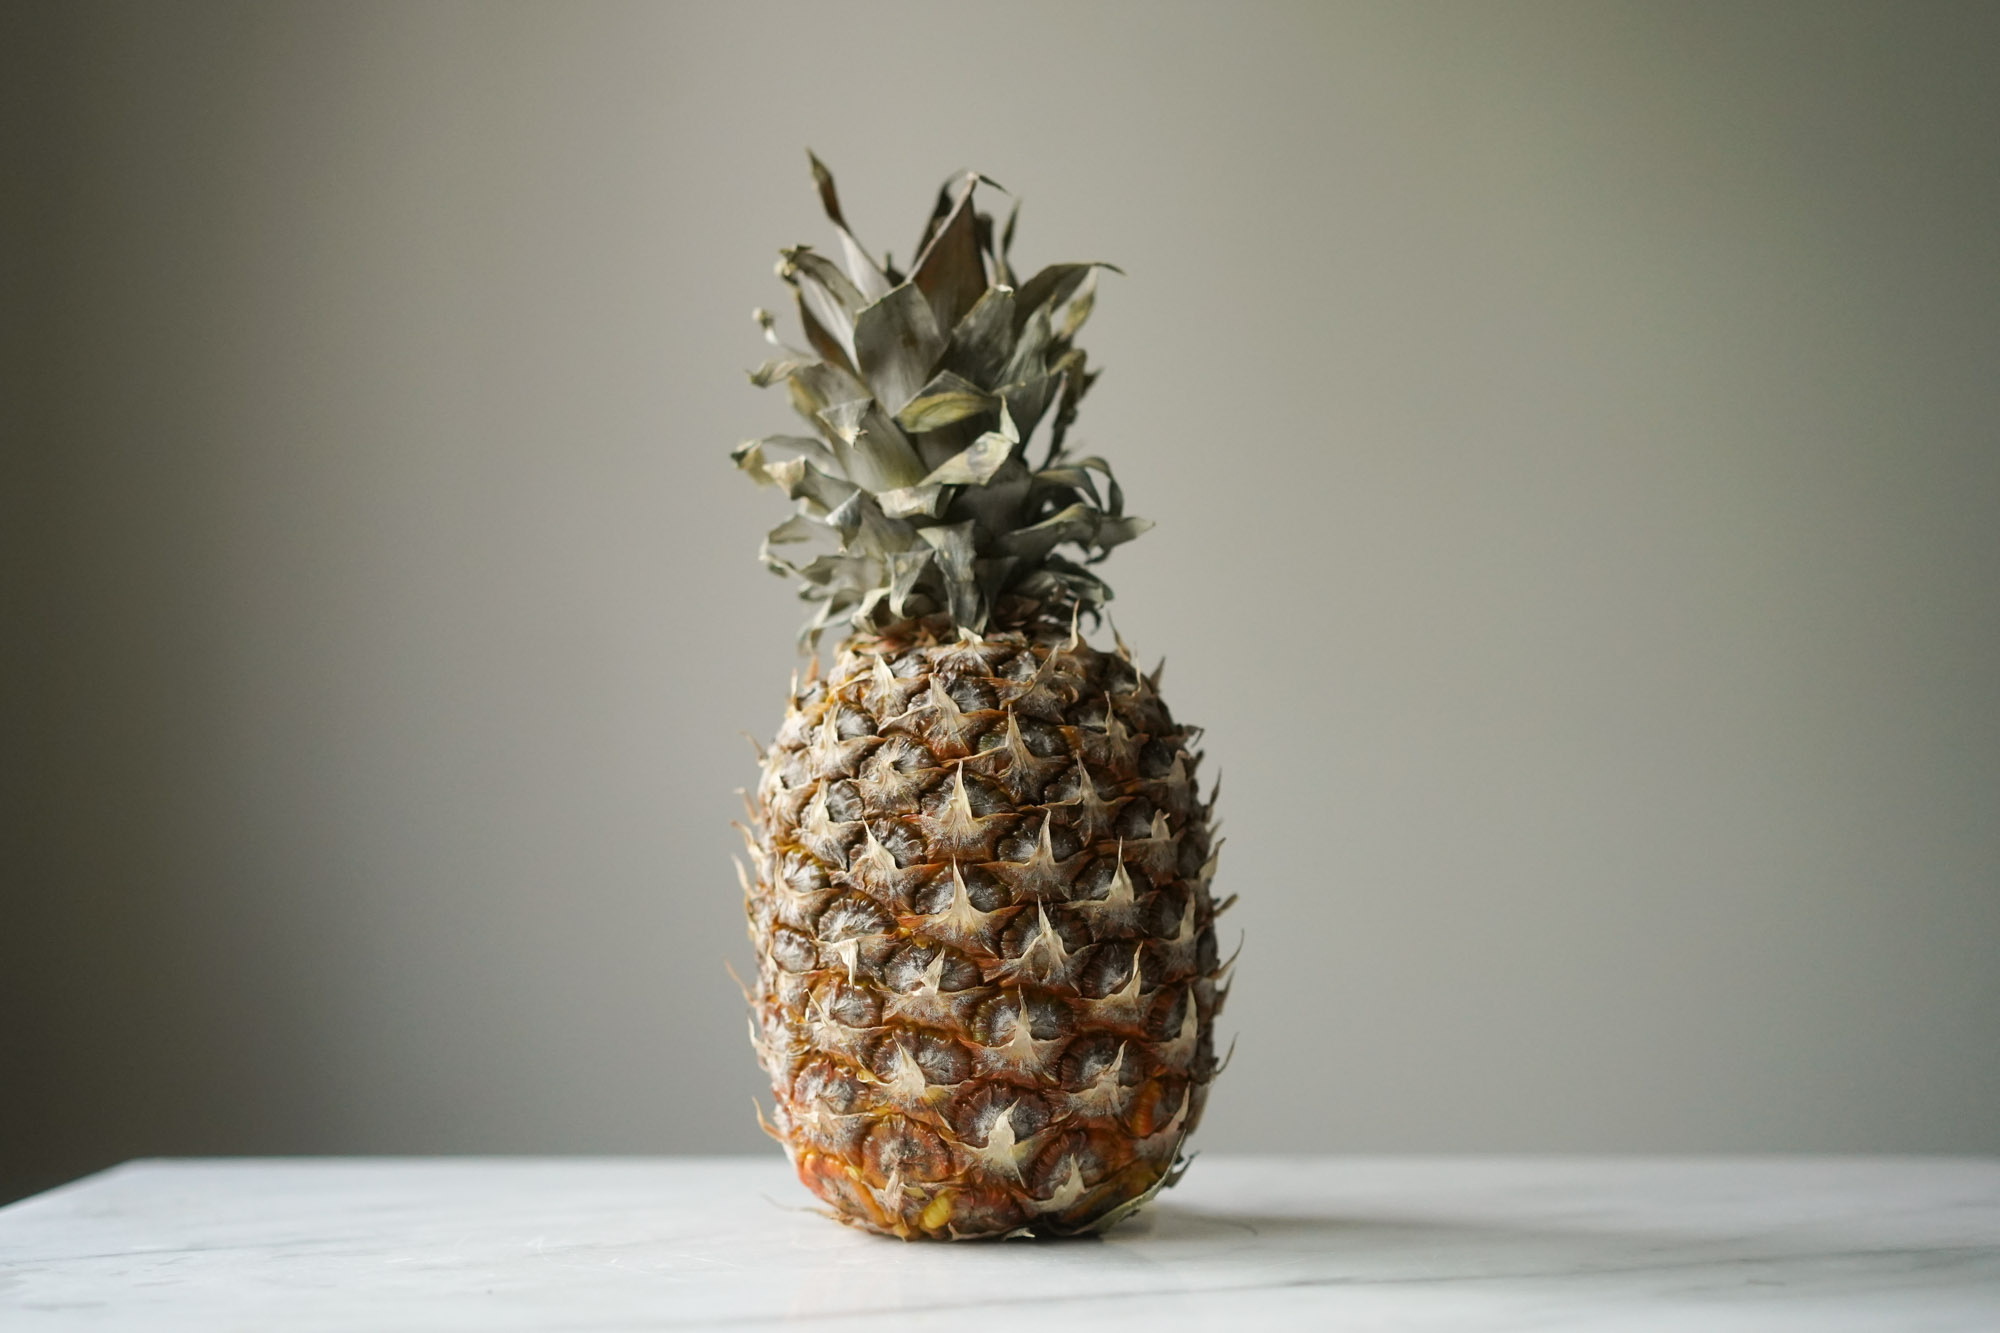 How to Ripen a Pineapple (4 Simple Tips)